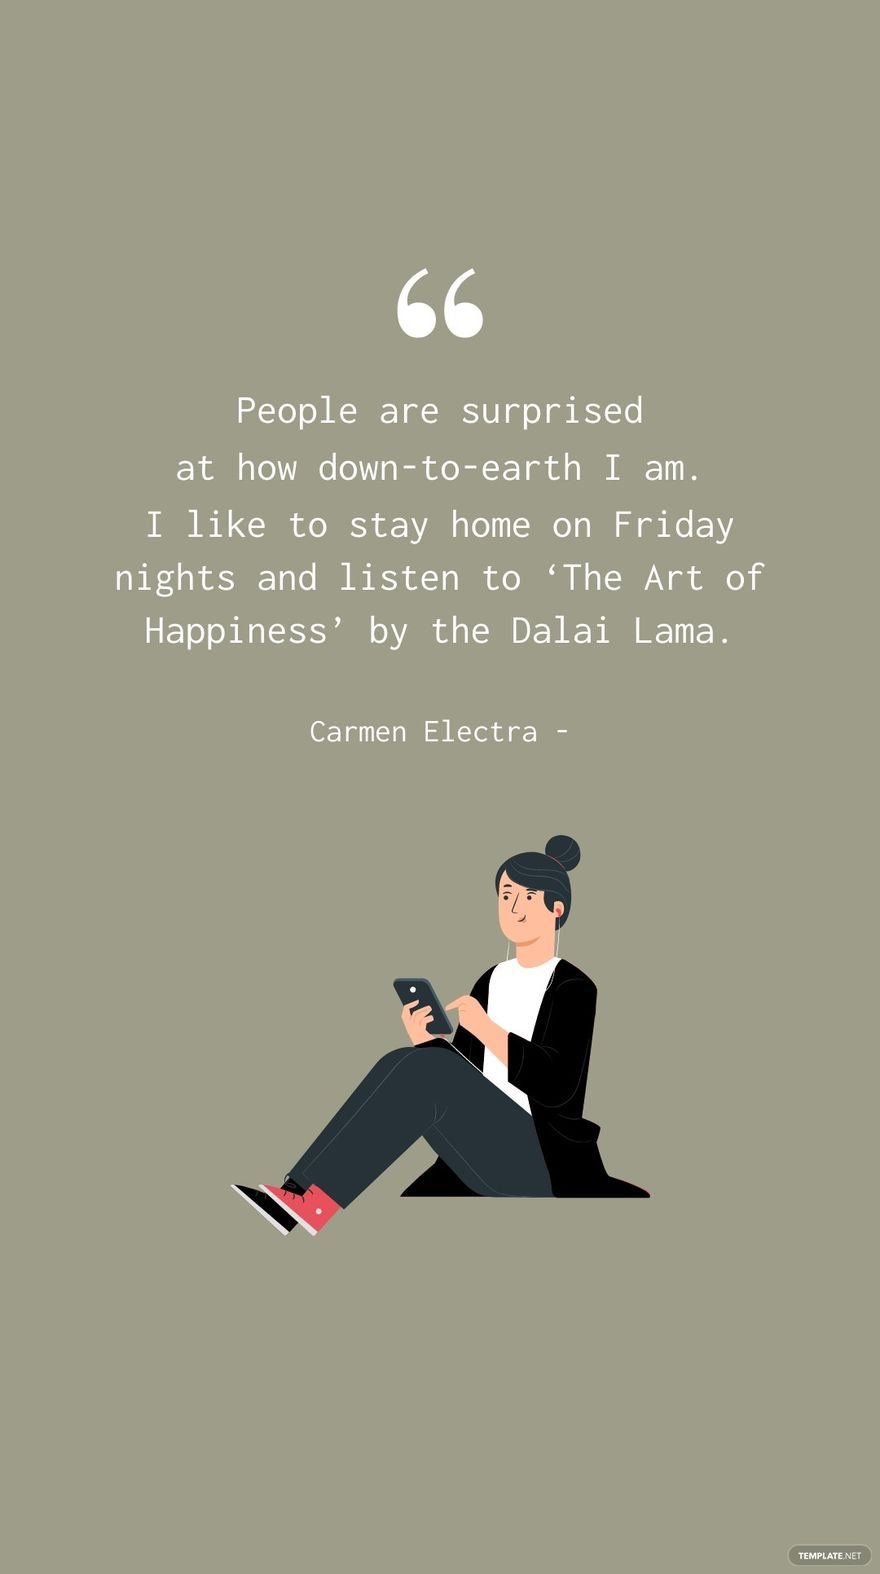 Free Carmen Electra - People are surprised at how down-to-earth I am. I like to stay home on Friday nights and listen to ‘The Art of Happiness’ by the Dalai Lama. in JPG